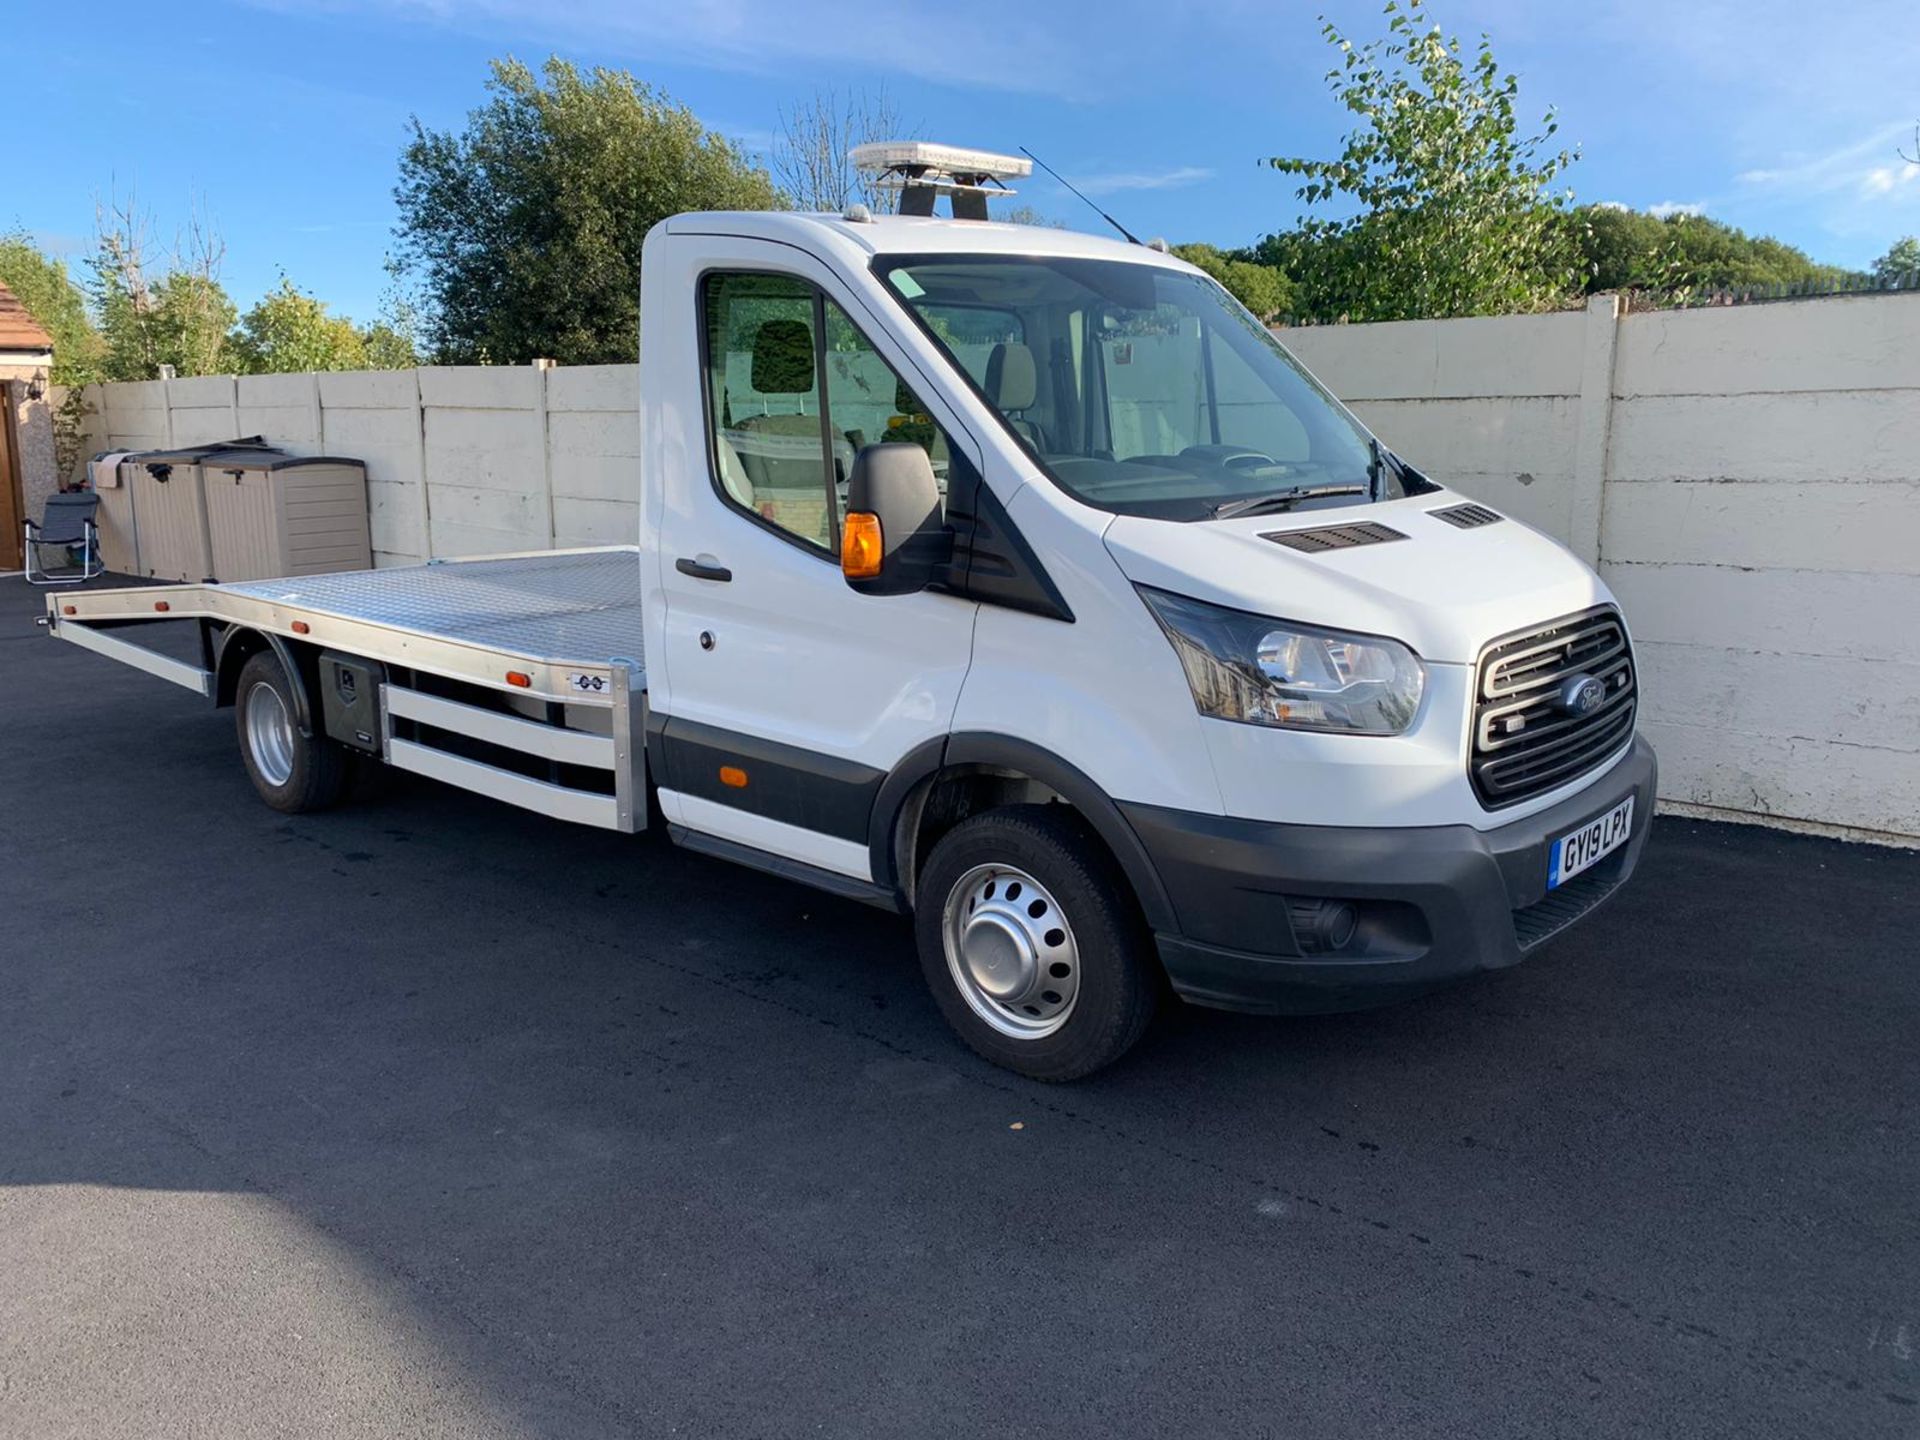 Ford transit recovery truck 2019 - Image 3 of 10